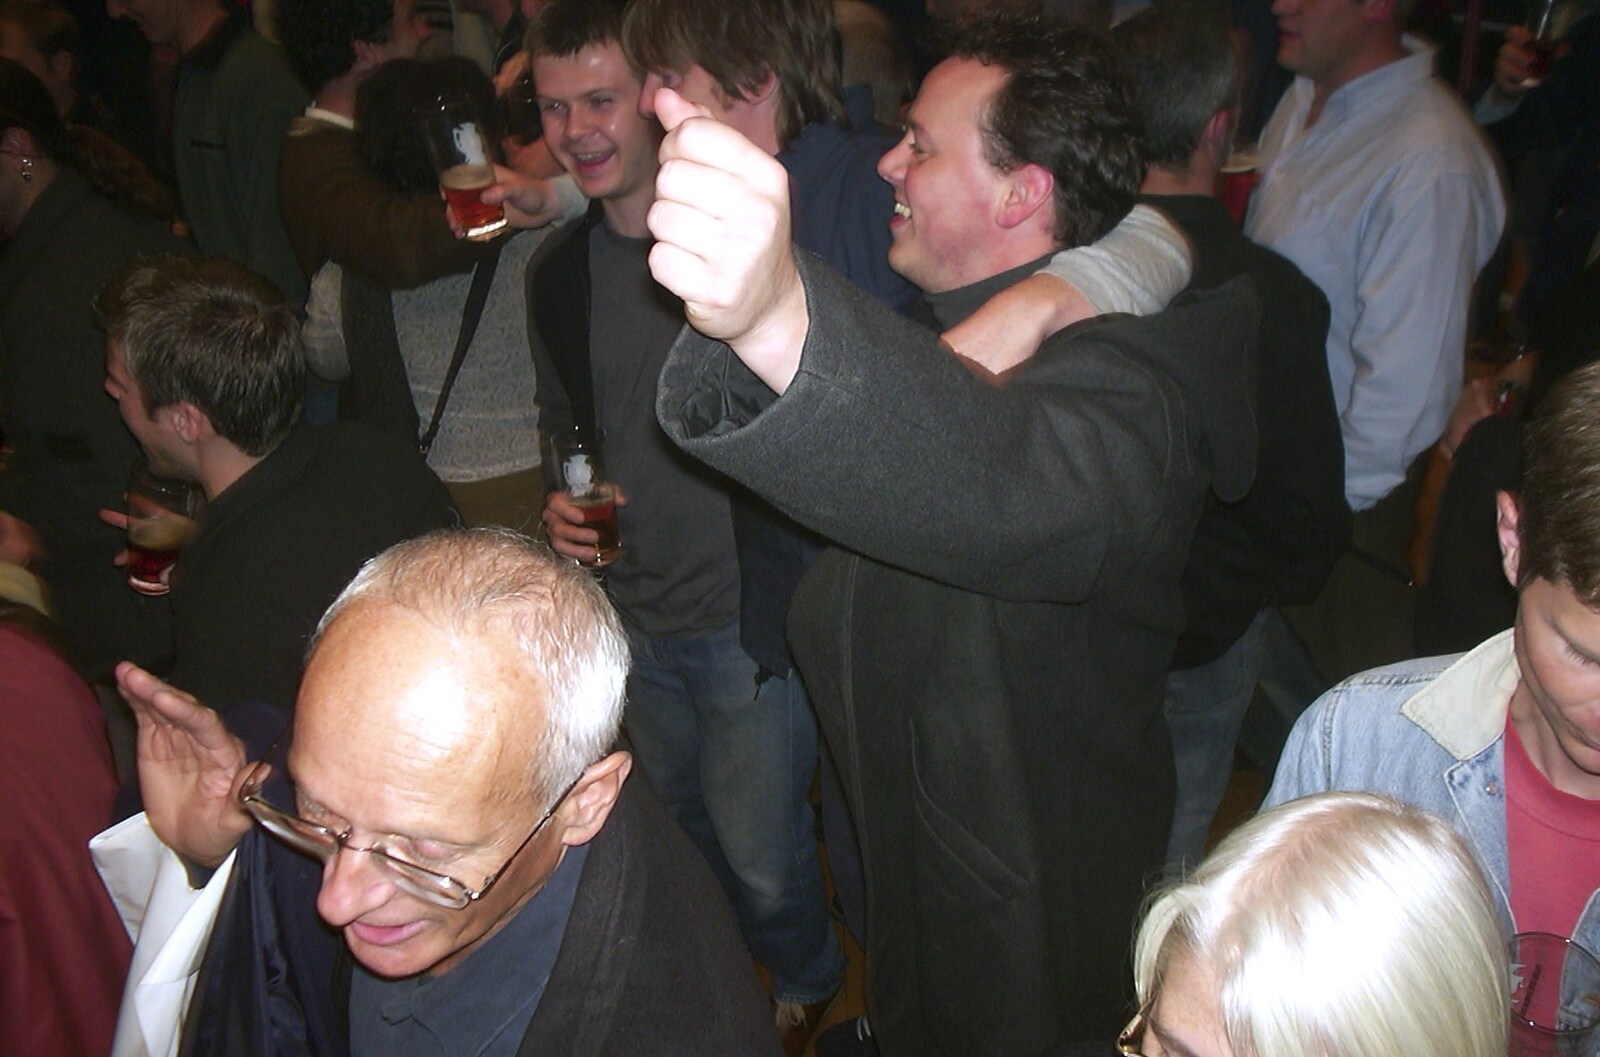 Heaving crowds from The Brome Swan at the Norwich Beer Festival, St. Andrew's Hall, Norwich - 29th October 2003